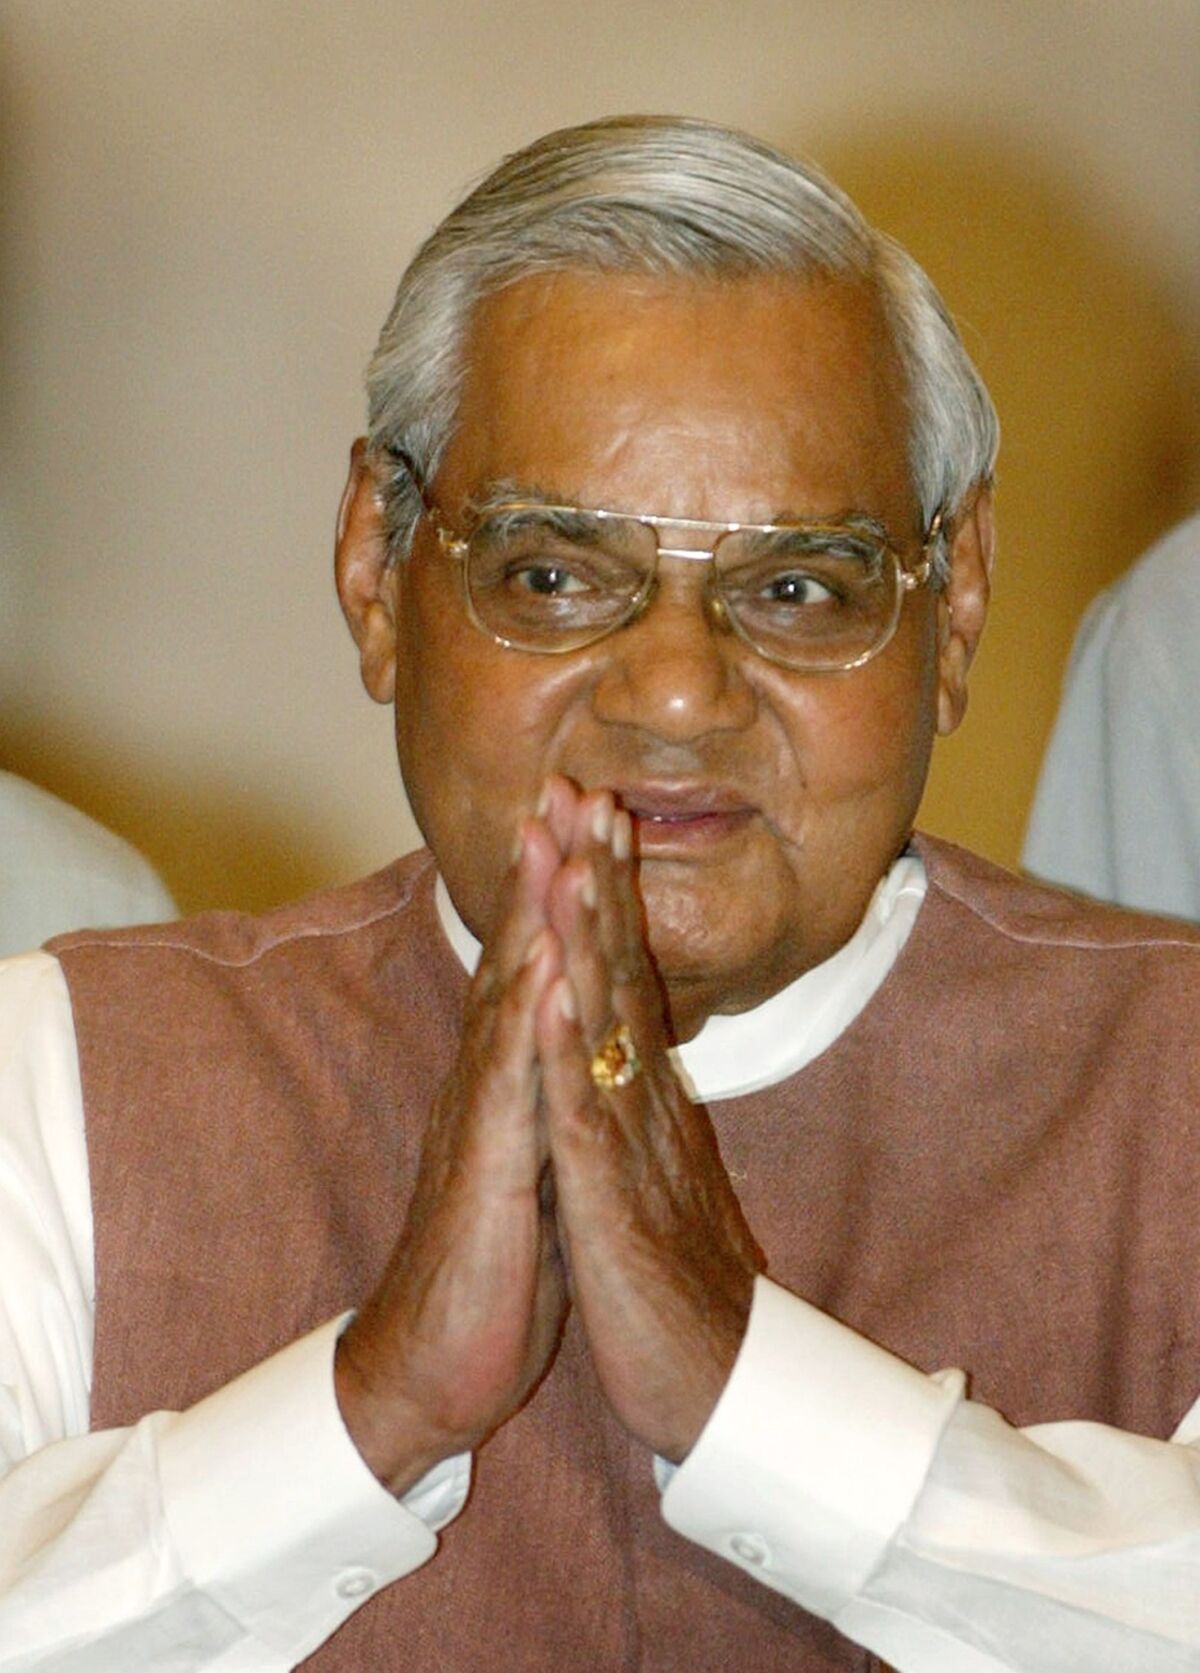 Indian Prime Minister Atal Bihari Vajpayee greets the audience as he arrives for a ceremony at the presidential palace in New Delhi on May 2, 2004.